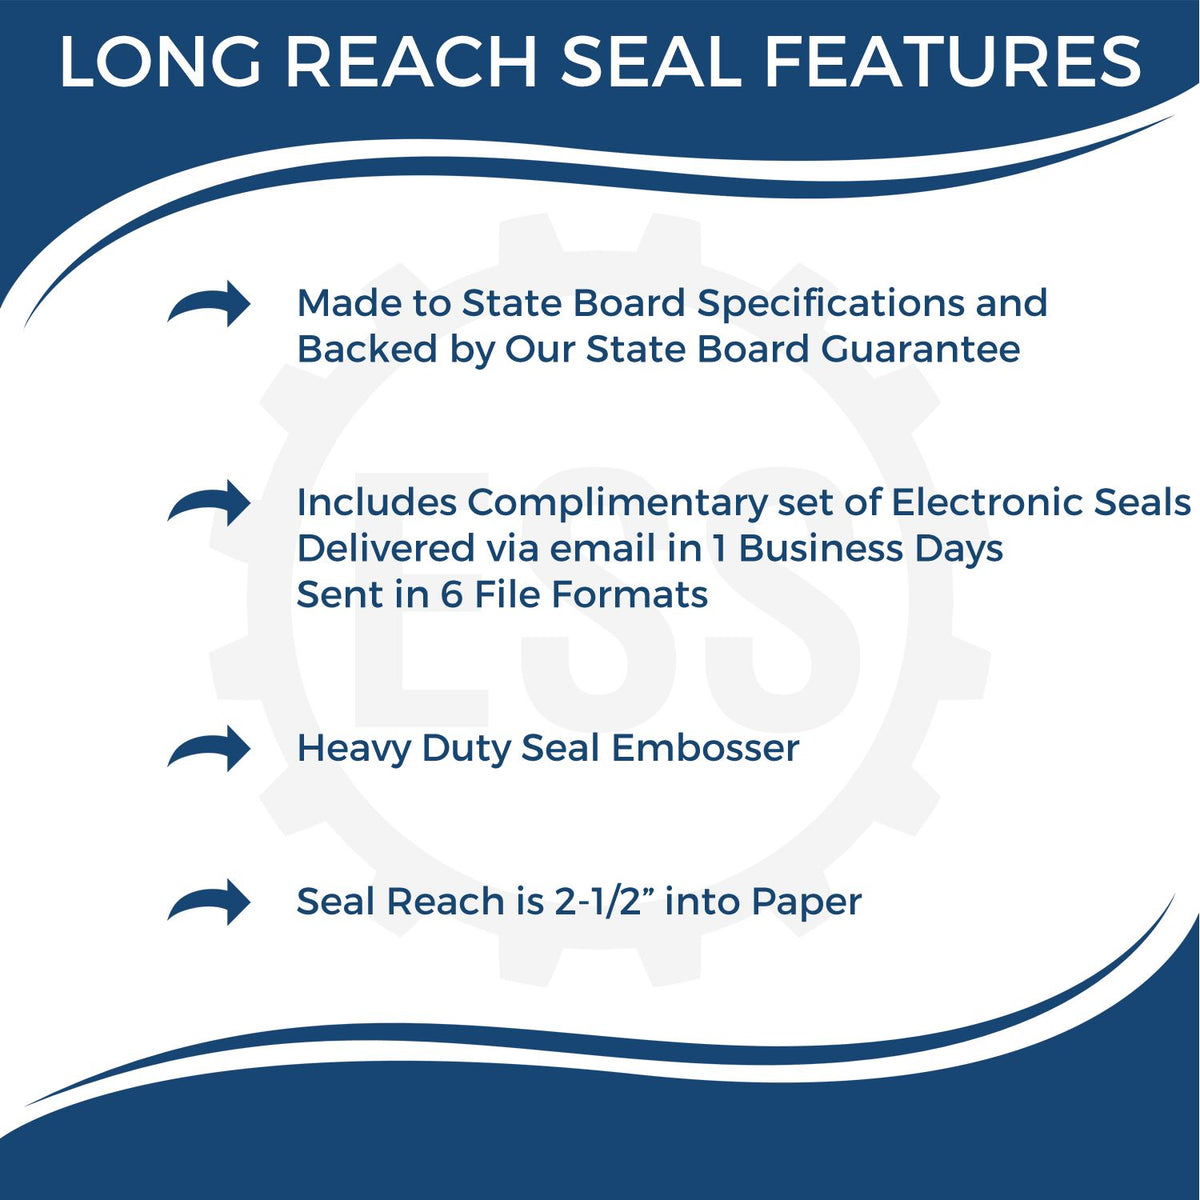 A picture of an infographic highlighting the selling points for the Long Reach South Carolina Geology Seal